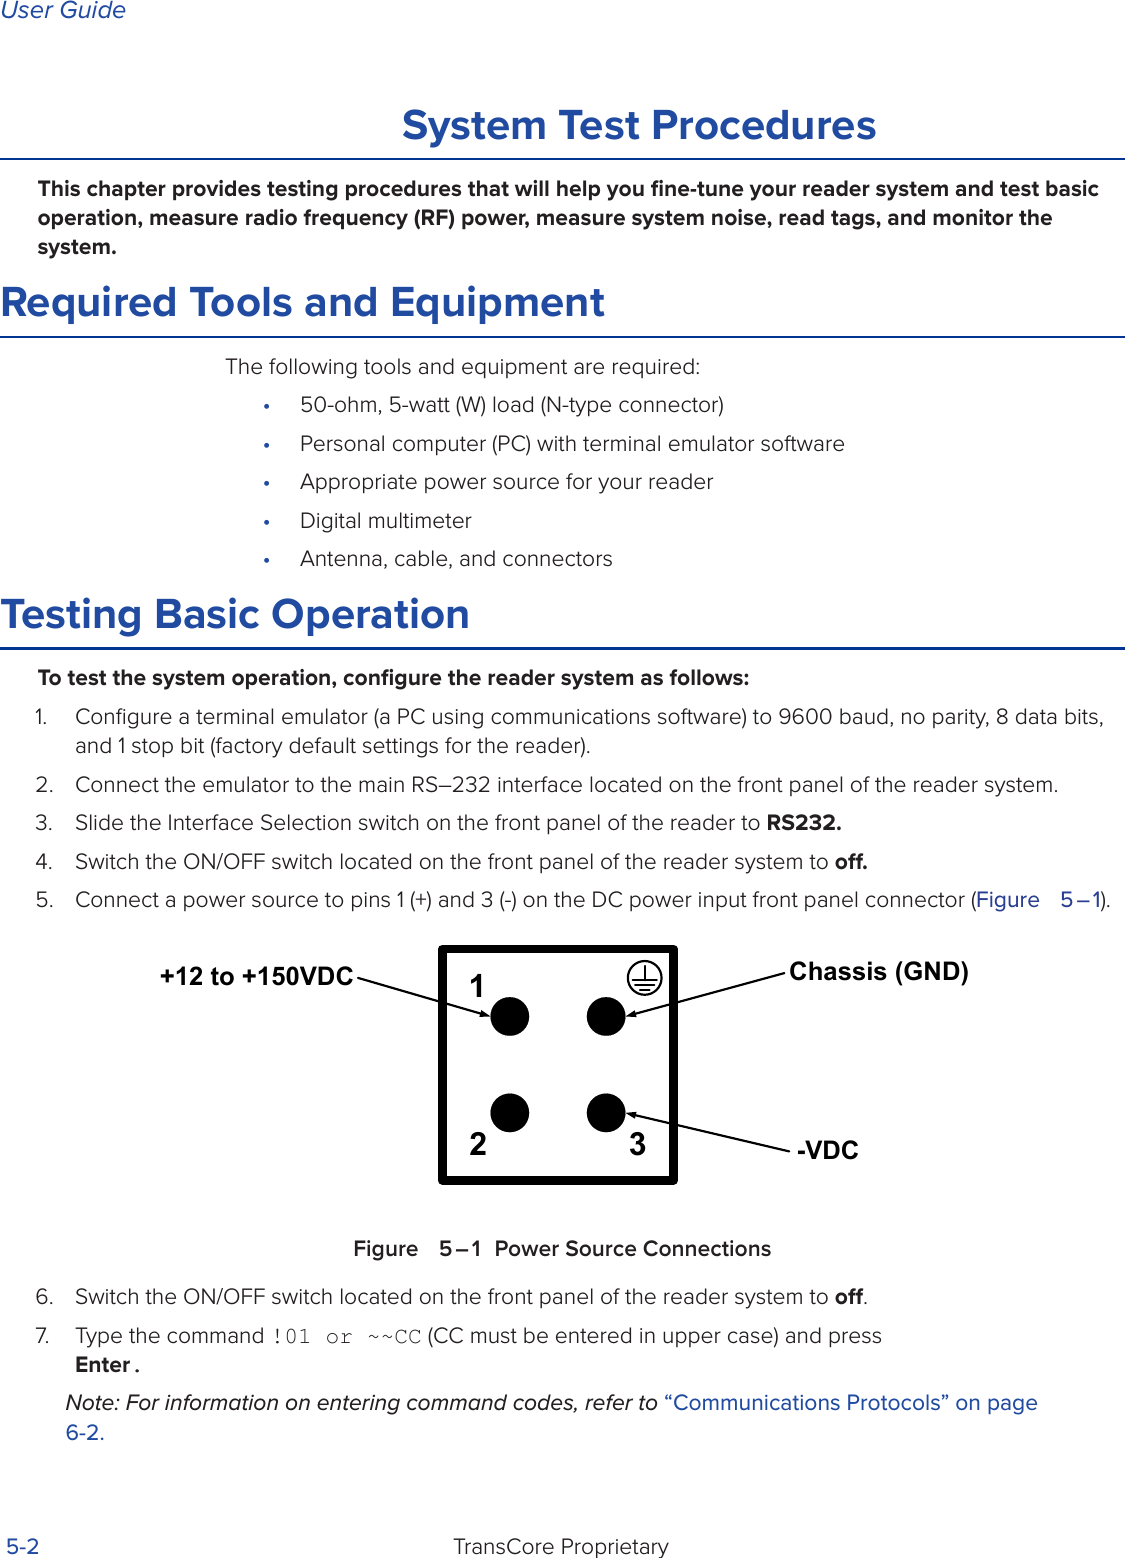 User GuideTransCore Proprietary 5-2System Test ProceduresThis chapter provides testing procedures that will help you ﬁne-tune your reader system and test basic operation, measure radio frequency (RF) power, measure system noise, read tags, and monitor the system.Required Tools and EquipmentThe following tools and equipment are required:•  50-ohm, 5-watt (W) load (N-type connector)•  Personal computer (PC) with terminal emulator software•  Appropriate power source for your reader•  Digital multimeter•  Antenna, cable, and connectorsTesting Basic OperationTo test the system operation, conﬁgure the reader system as follows: 1.  Conﬁgure a terminal emulator (a PC using communications software) to 9600 baud, no parity, 8 data bits, and 1 stop bit (factory default settings for the reader).2.  Connect the emulator to the main RS–232 interface located on the front panel of the reader system.3.  Slide the Interface Selection switch on the front panel of the reader to RS232.4.  Switch the ON/OFF switch located on the front panel of the reader system to o.5.  Connect a power source to pins 1 (+) and 3 (-) on the DC power input front panel connector (Figure   5 – 1). Figure   5 – 1  Power Source Connections6.  Switch the ON/OFF switch located on the front panel of the reader system to o.7.  Type the command !01 or ~~CC (CC must be entered in upper case) and press Enter. Note: For information on entering command codes, refer to “Communications Protocols” on page 6-2.12 3Chassis (GND)-VDC+12 to +150VDC